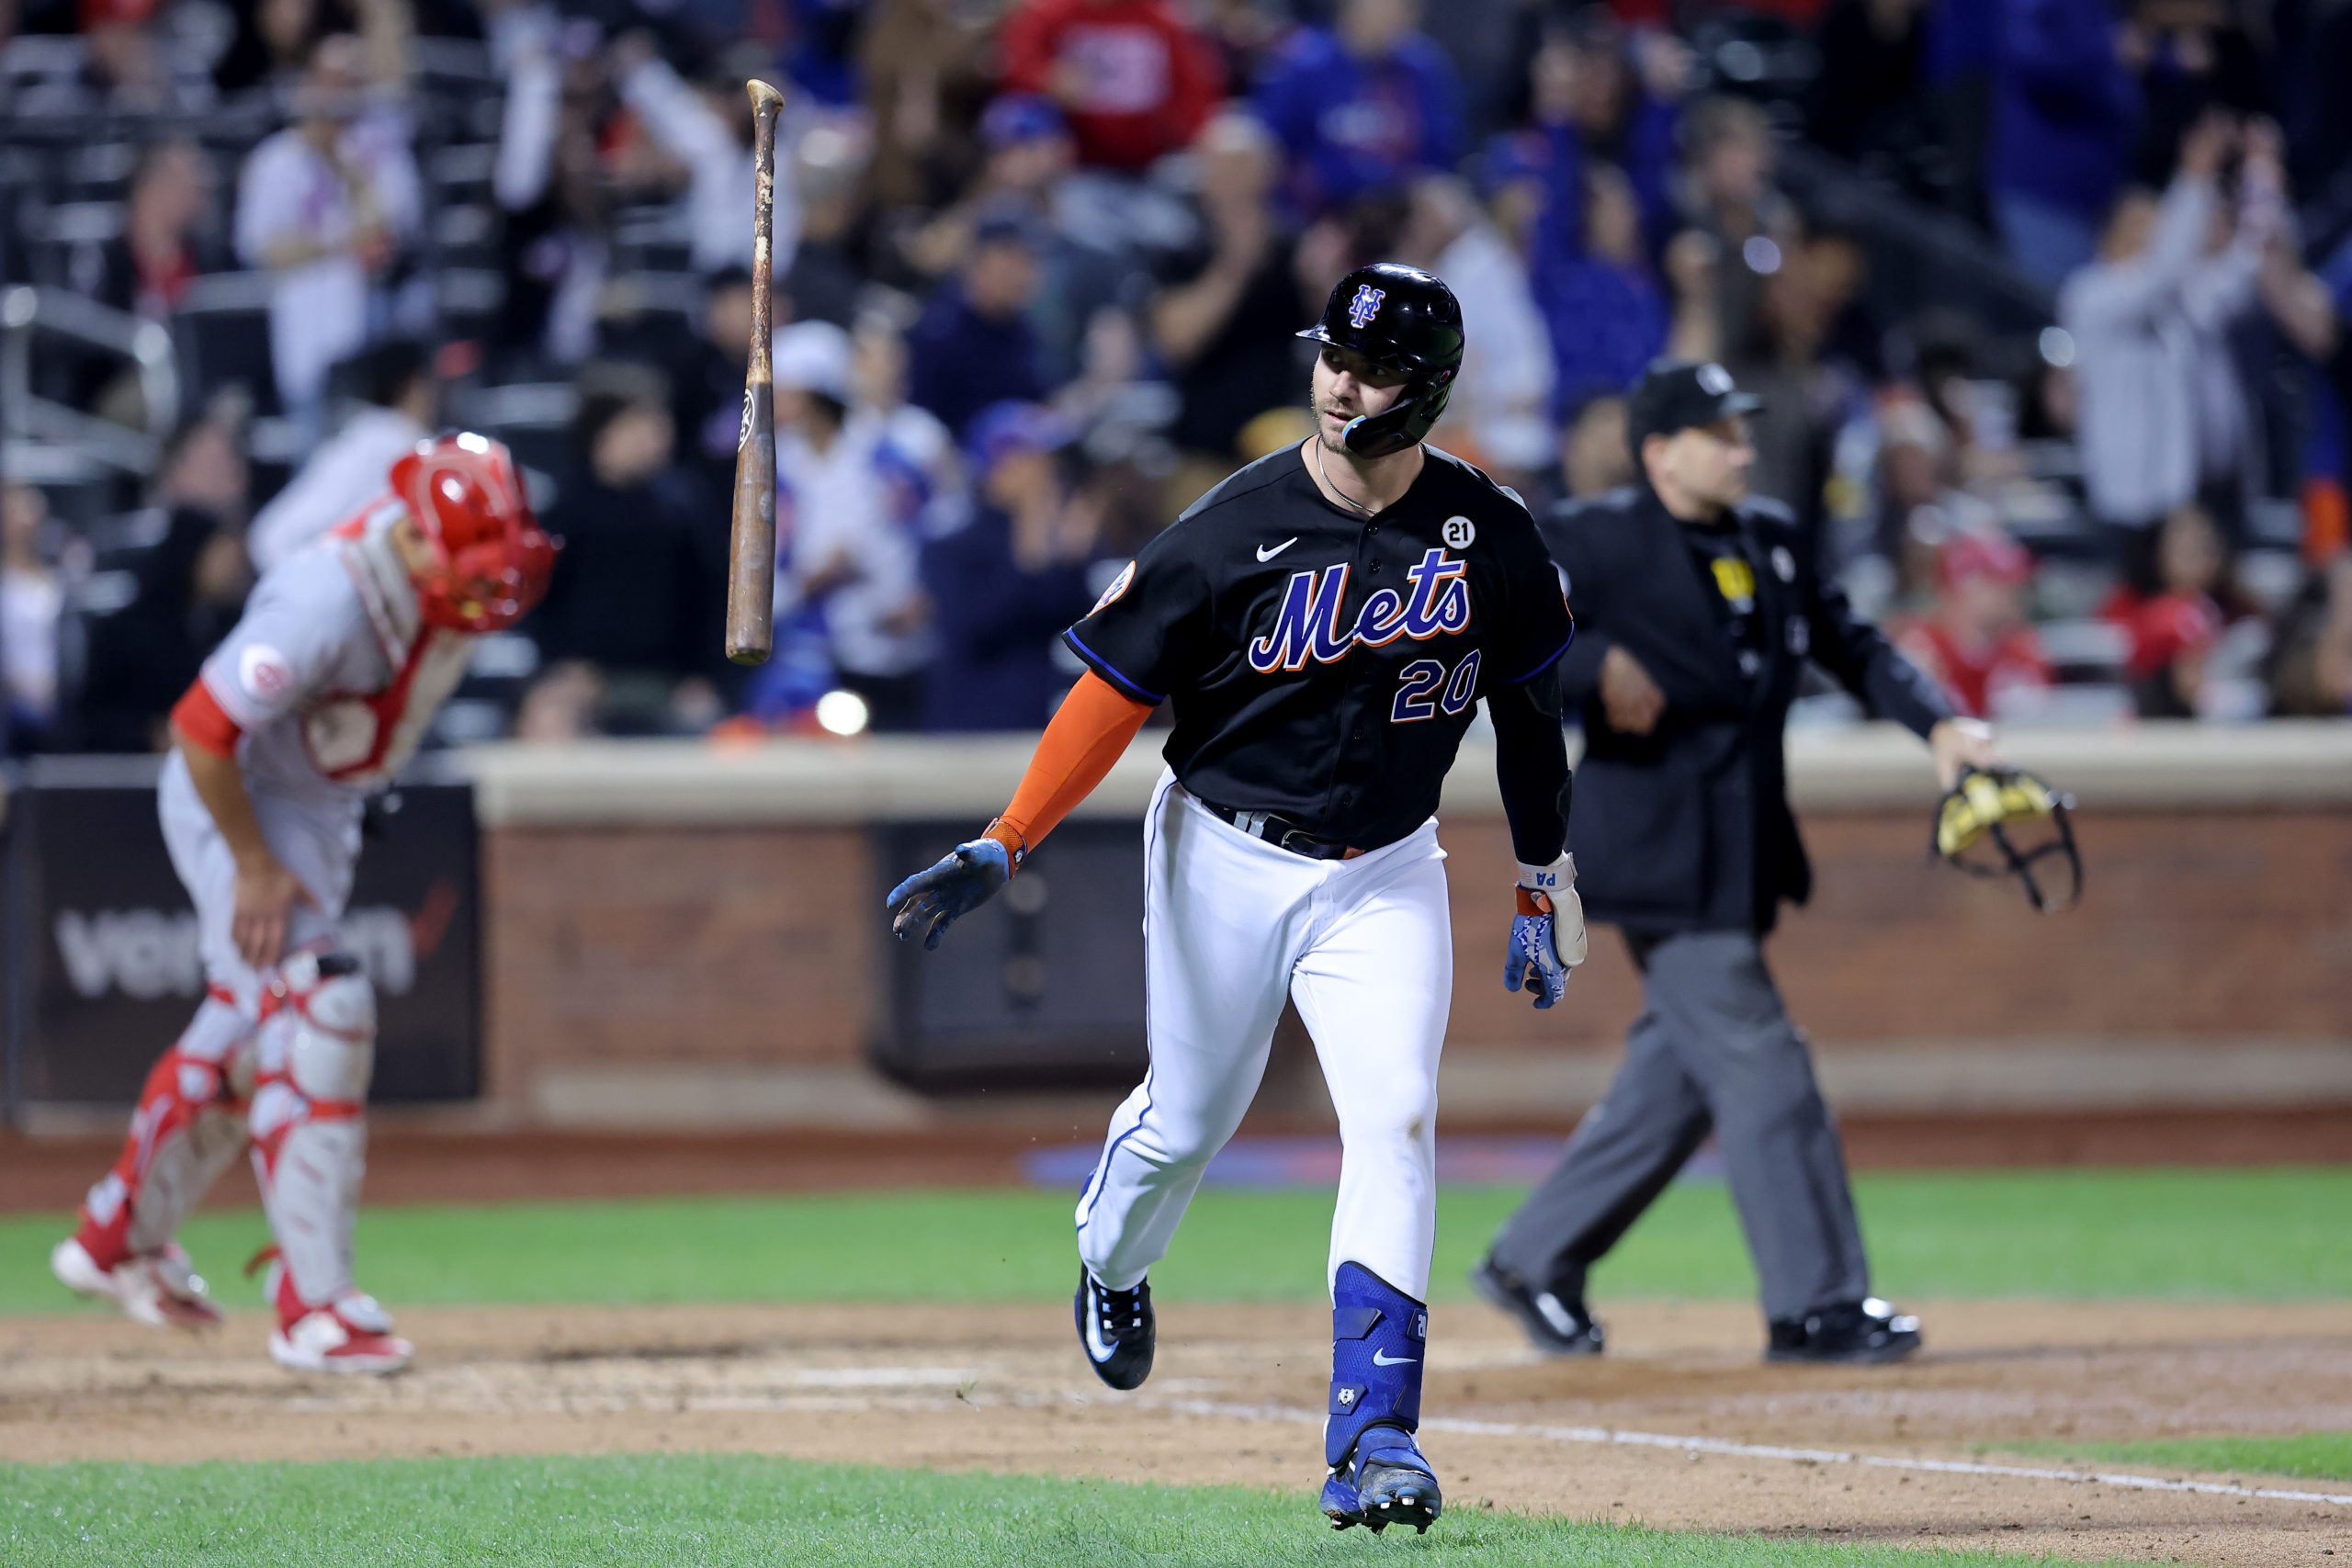 Mets slugger Pete Alonso returns to where it all began in Tampa